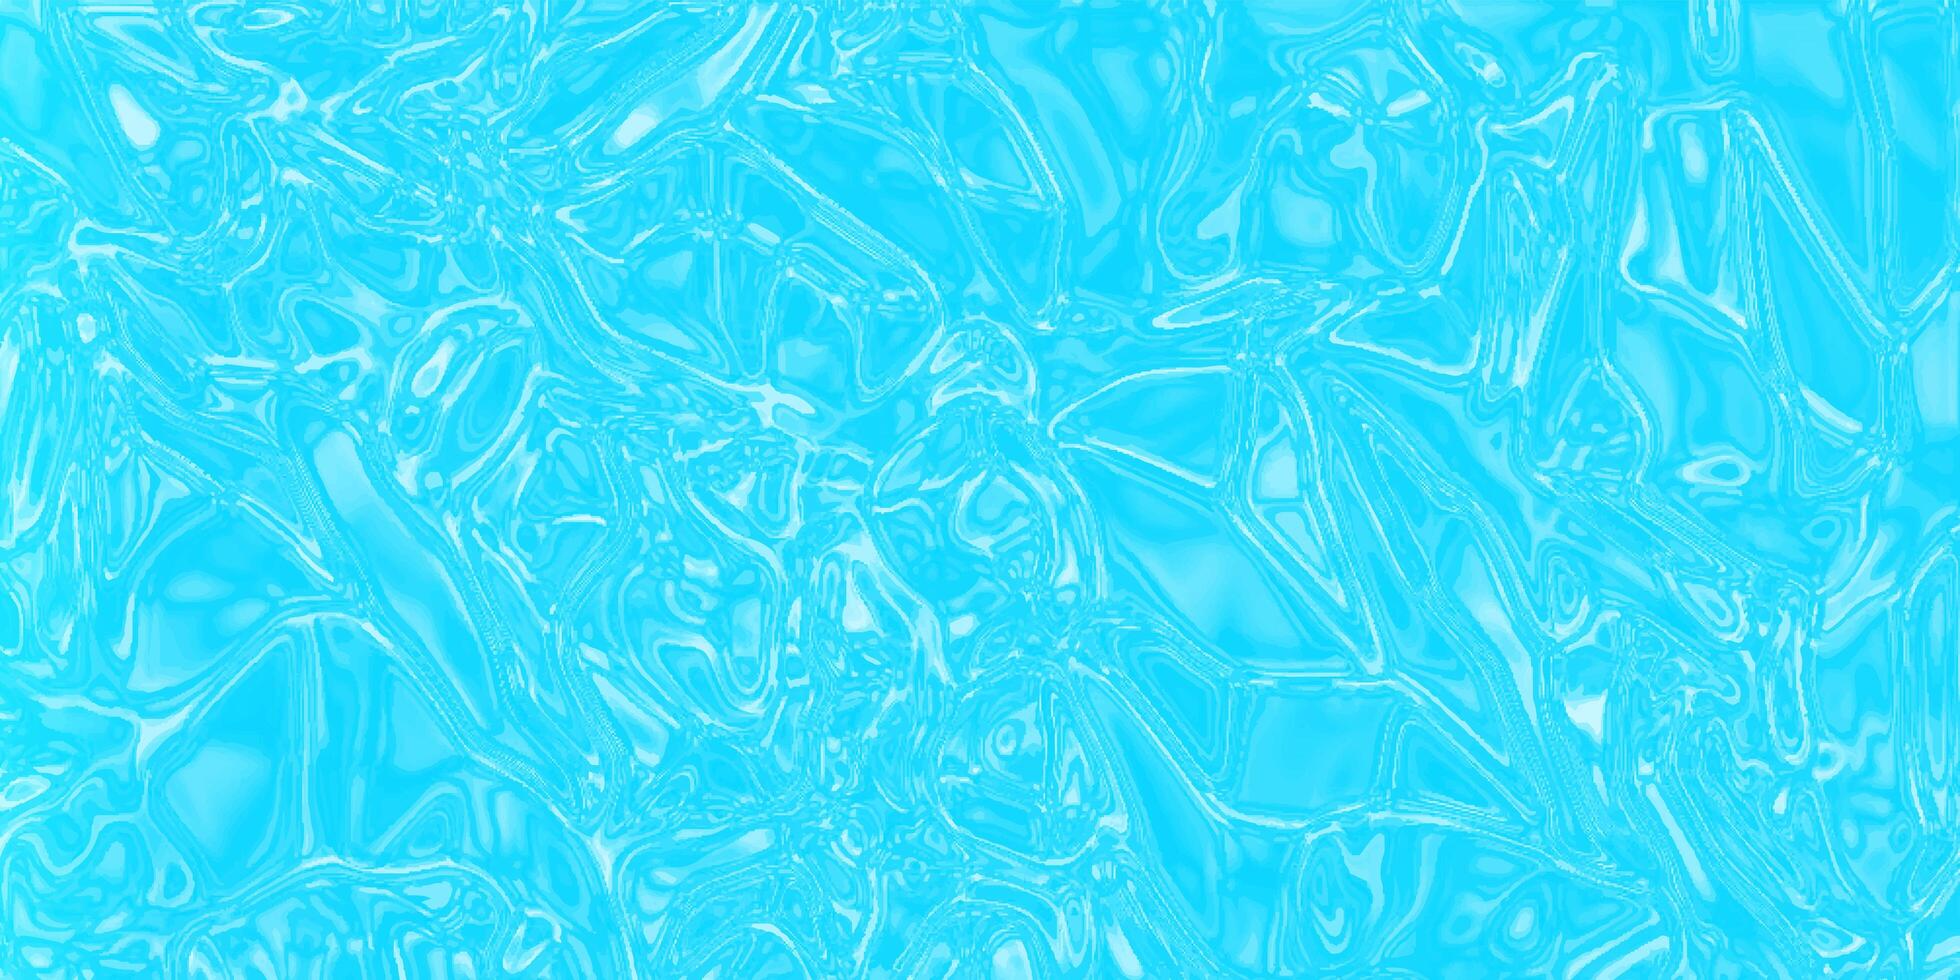 Crystal blue water surface texture, Abstract blue crystalized liquid pattern, Abstract blue water surface texture with splashes and bubbles, blue background with quartz texture perfect for cover. photo